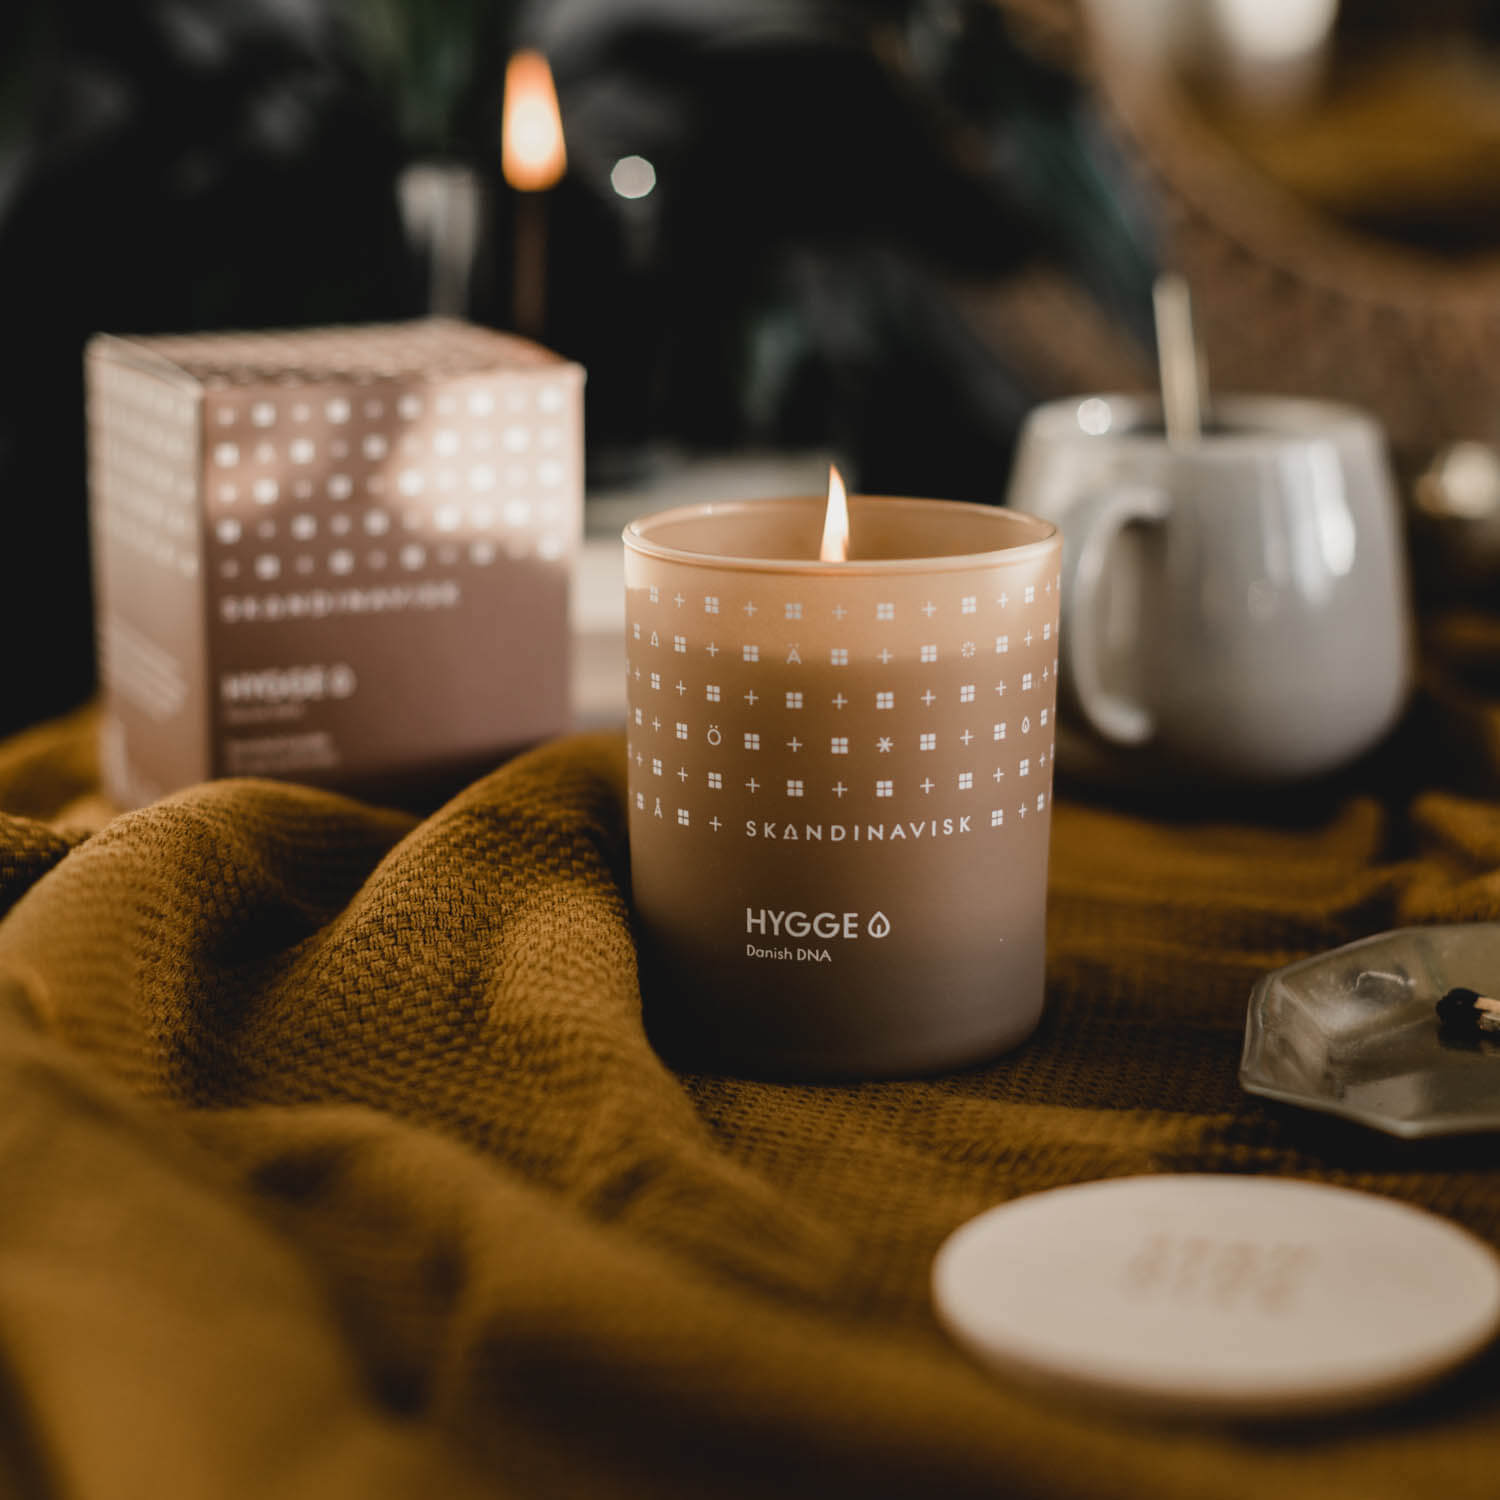 HYGGE (Cosiness) Scented Candle by Skandinavisk